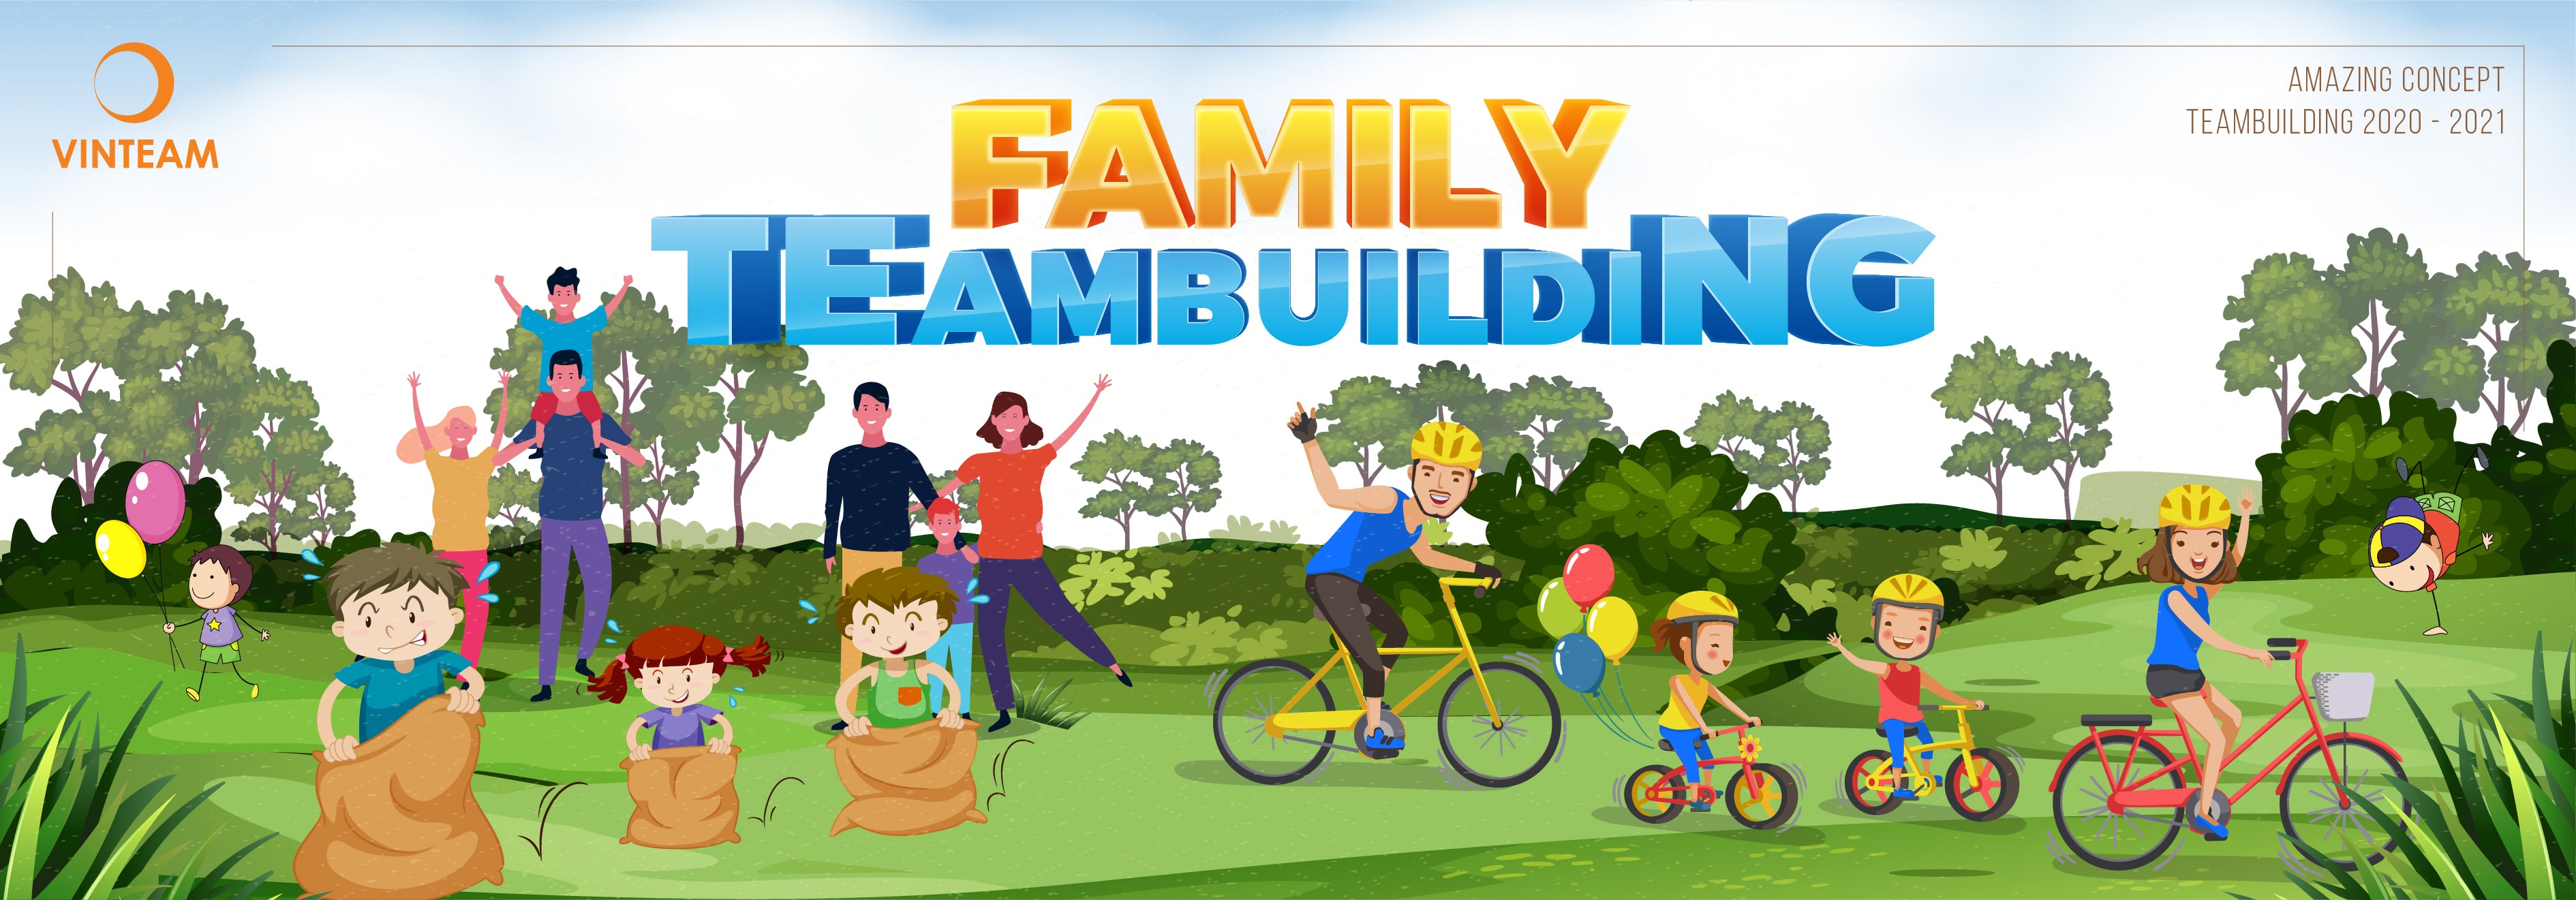 7-COVER-FAMILY-TEAMBUILDING-01-min